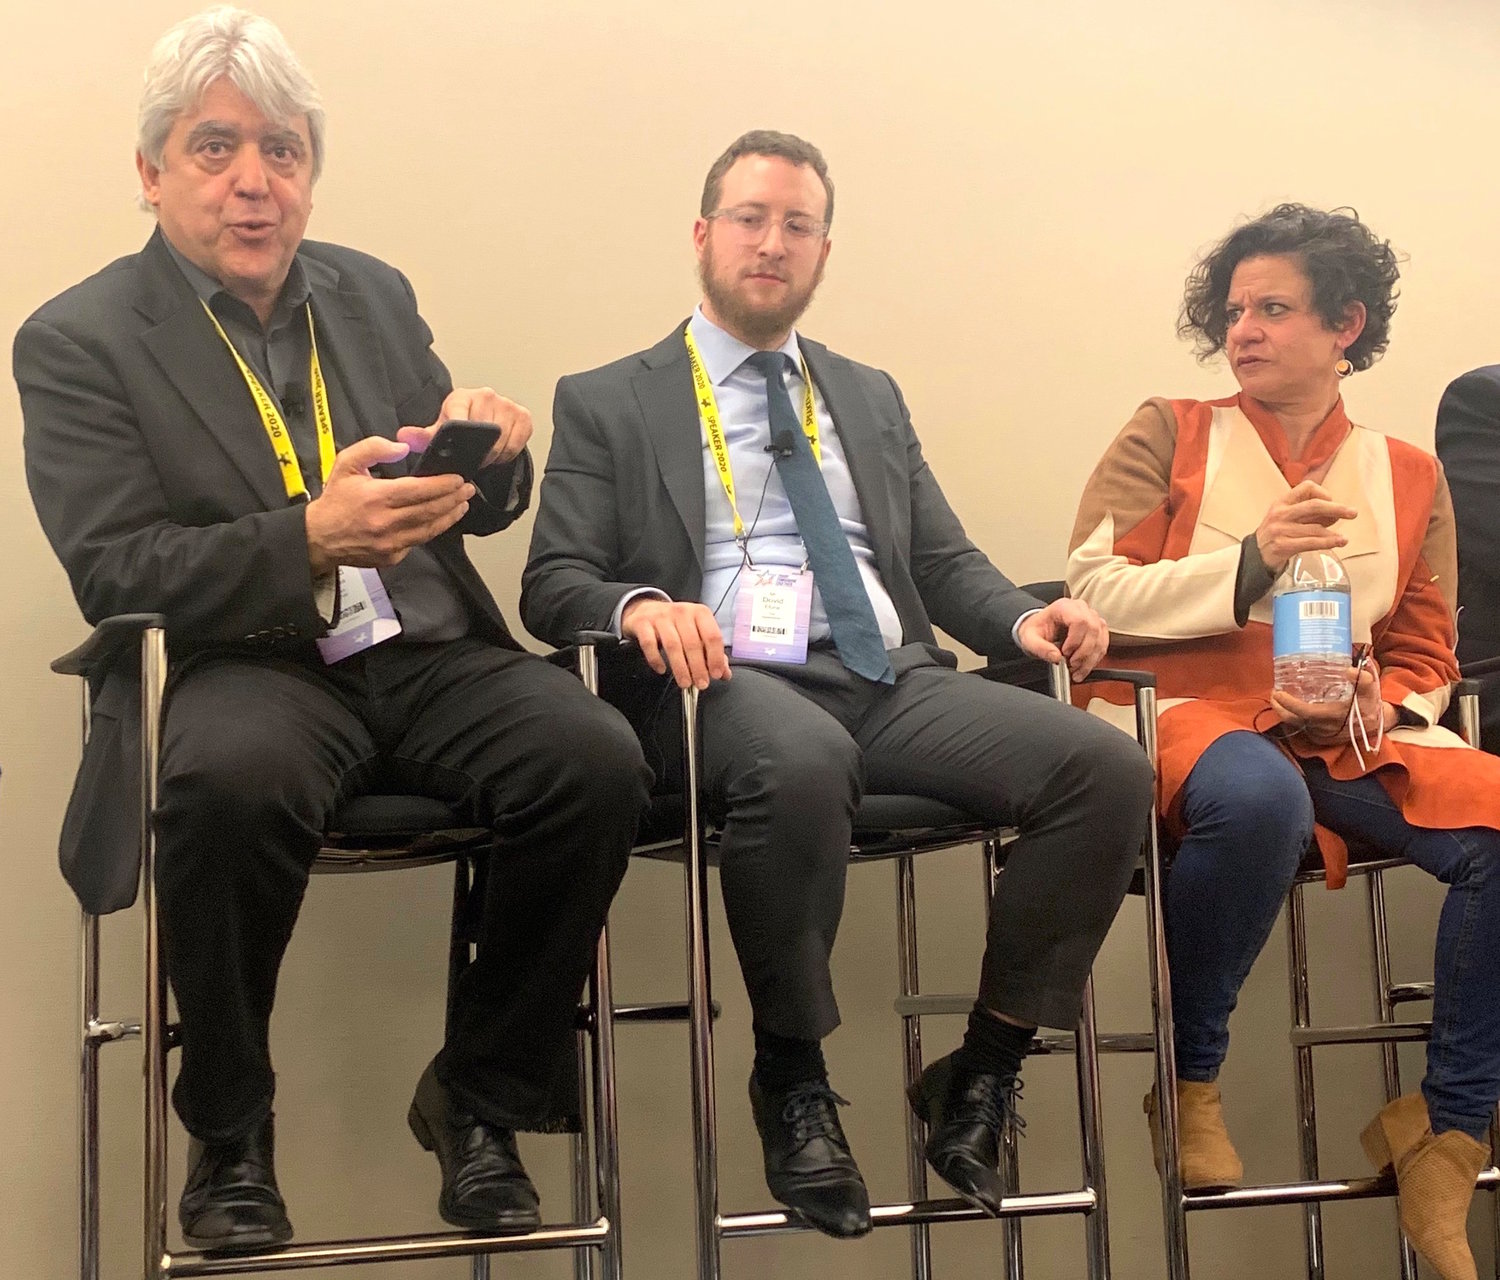 The author, David Suissa (left), participated in a panel at this week's AIPAC Policy Conference in Washington.